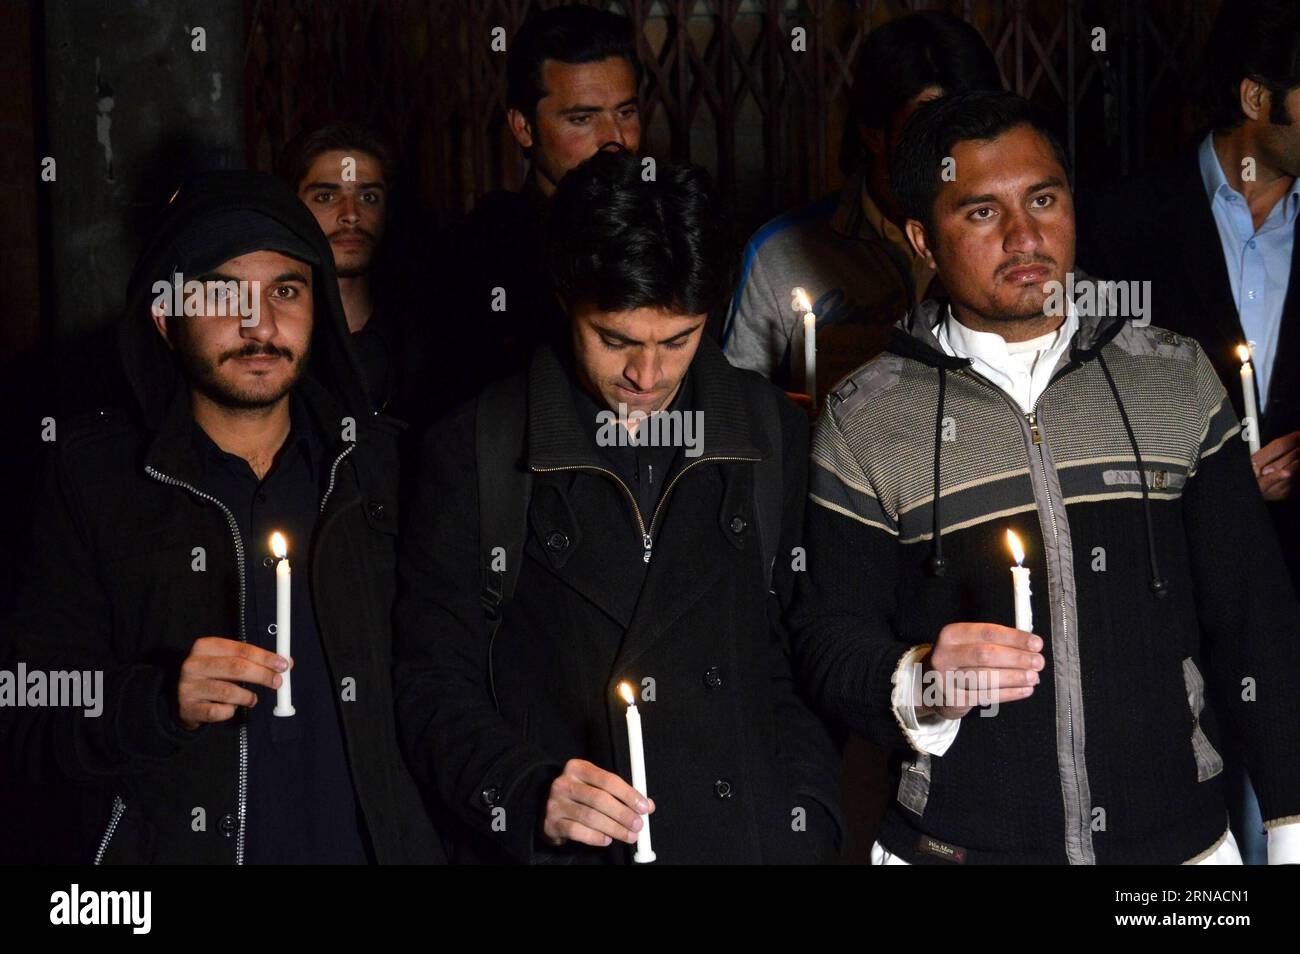 (160120) -- QUETTA, Jan. 20, 2016 -- Pakistani people hold candles during a vigil ceremony mourning victims of an attack in Bacha Khan University in southwest Pakistan s Quetta on Jan. 20, 2016. At least 22 people were killed and over 40 others injured when an unknown number of gunmen stormed a university in Charsadda district of Pakistan s northwest province of Khyber Pakhtunkhwa on Wednesday morning, local media reported. ) PAKISTAN-QUETTA-CHARSADDA-ATTACK-VIGIL Irfan PUBLICATIONxNOTxINxCHN   160120 Quetta Jan 20 2016 Pakistani Celebrities Hold Candles during a Vigil Ceremony Mourning Victim Stock Photo